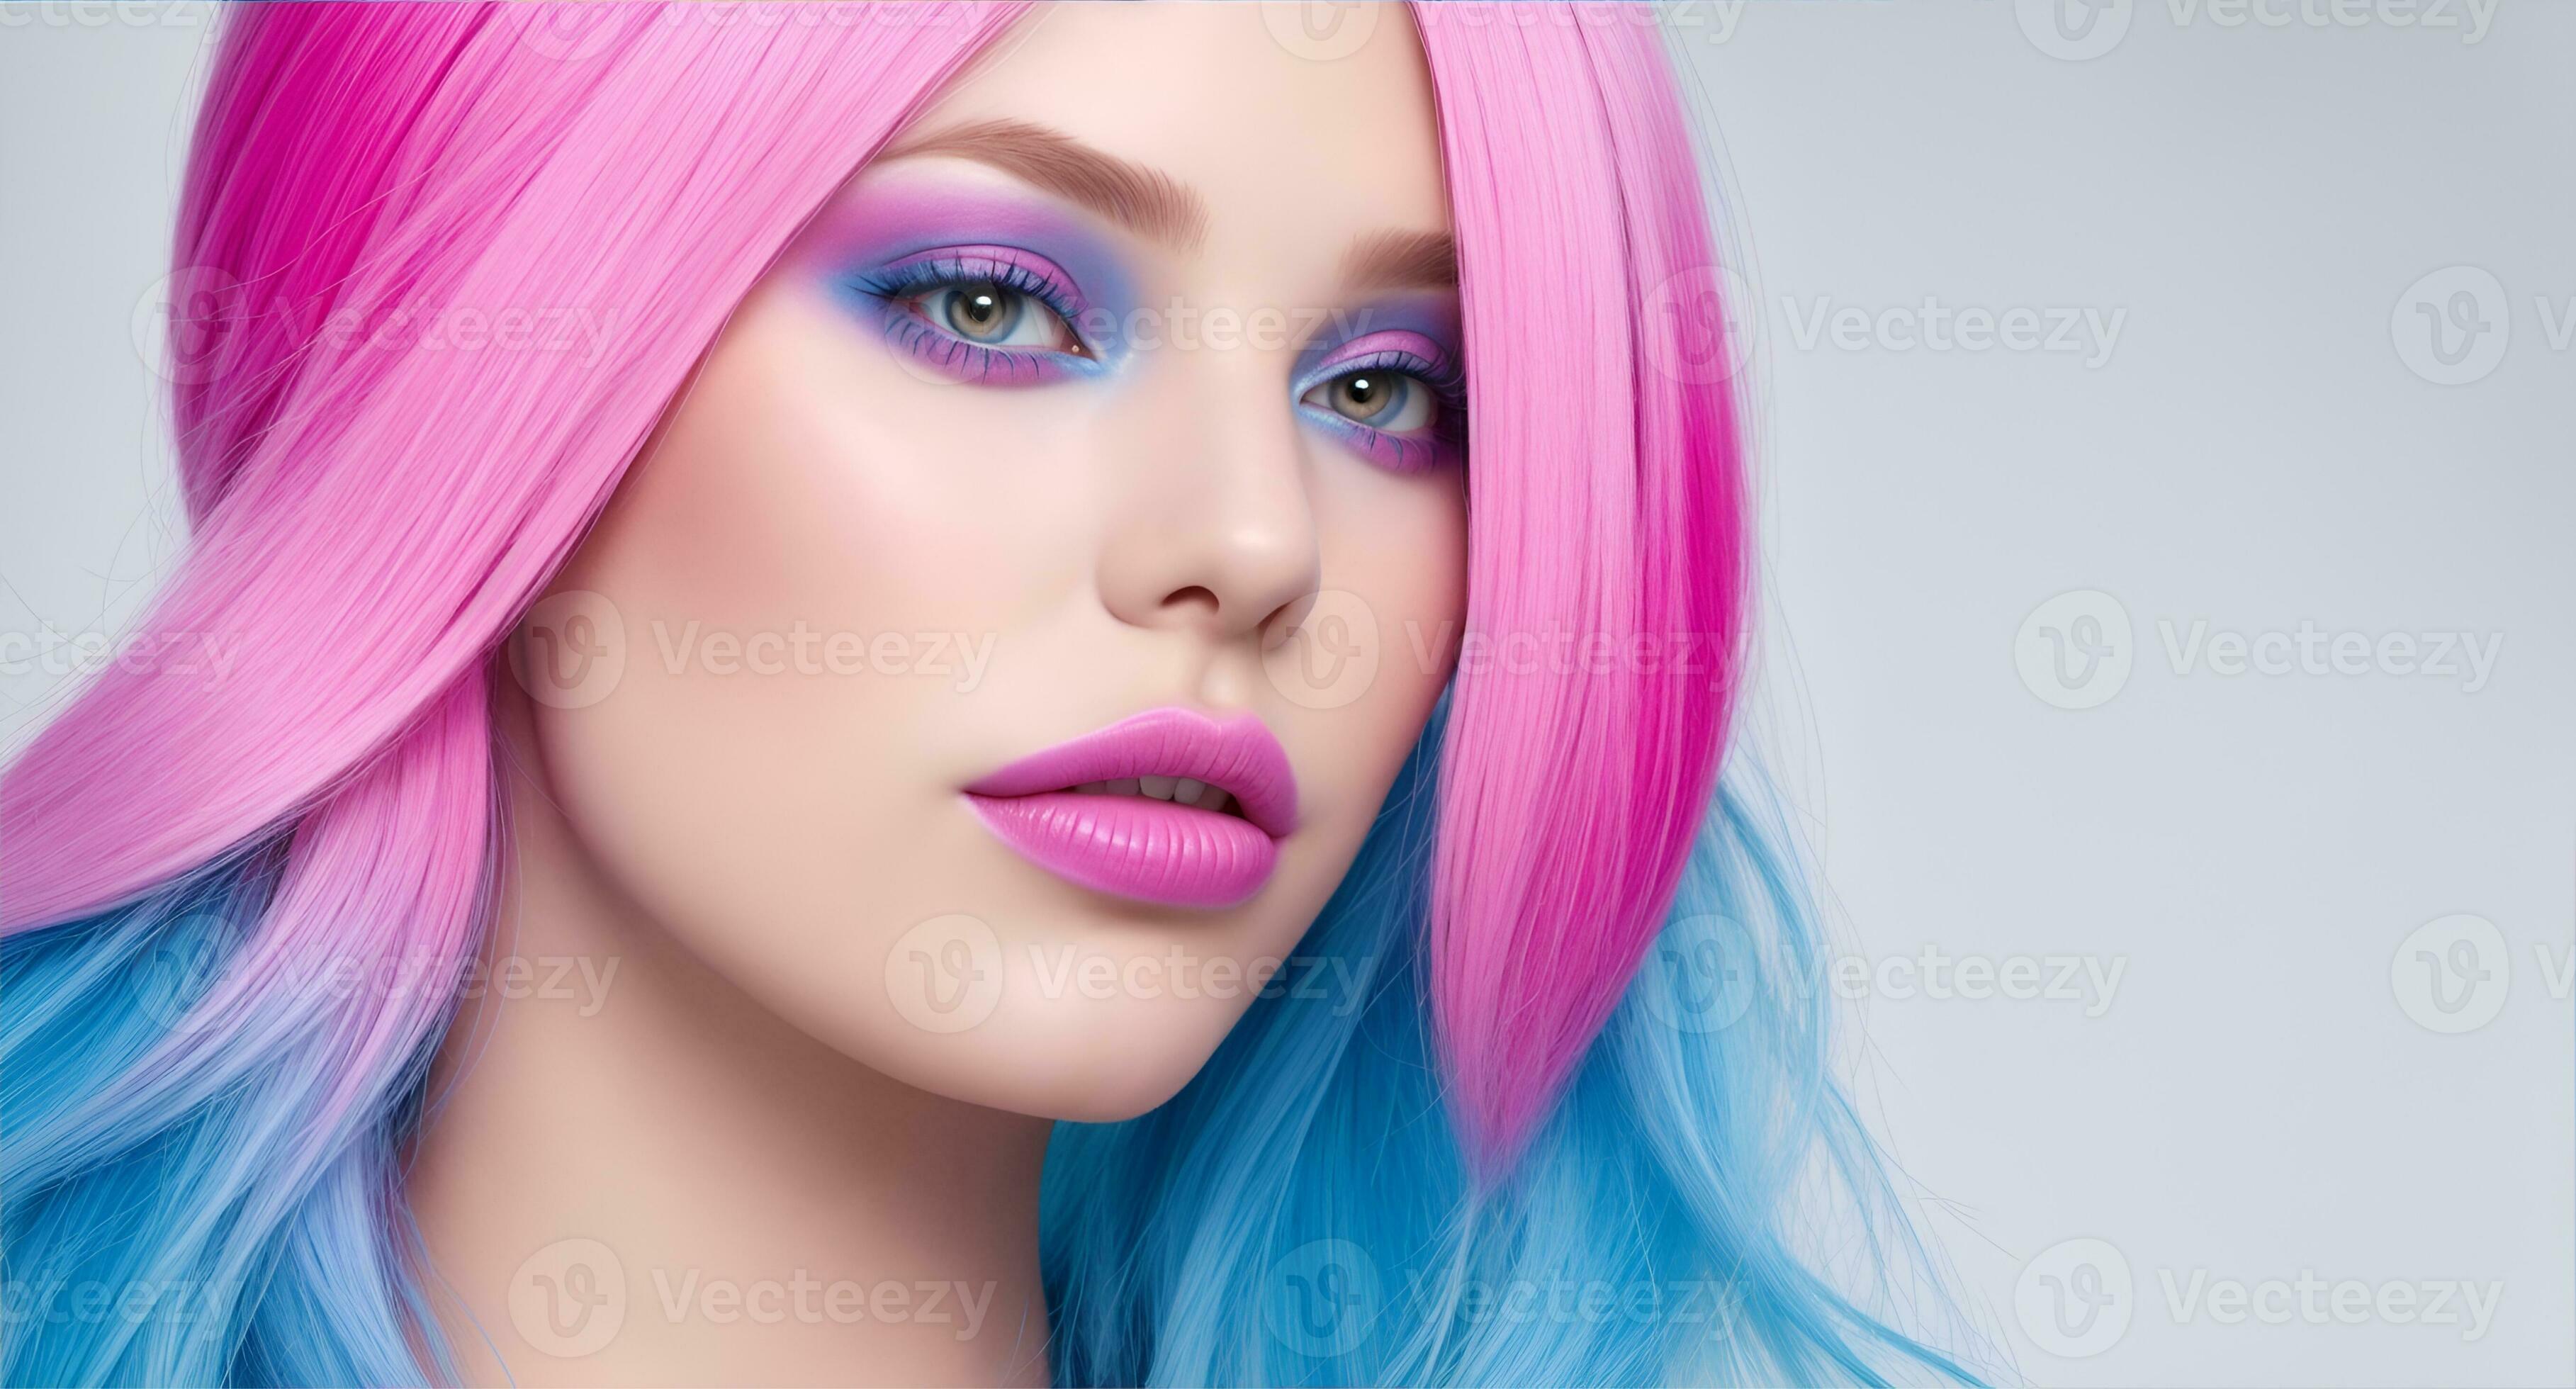 2. How to Achieve Pink and Blue Hair Curls at Home - wide 2